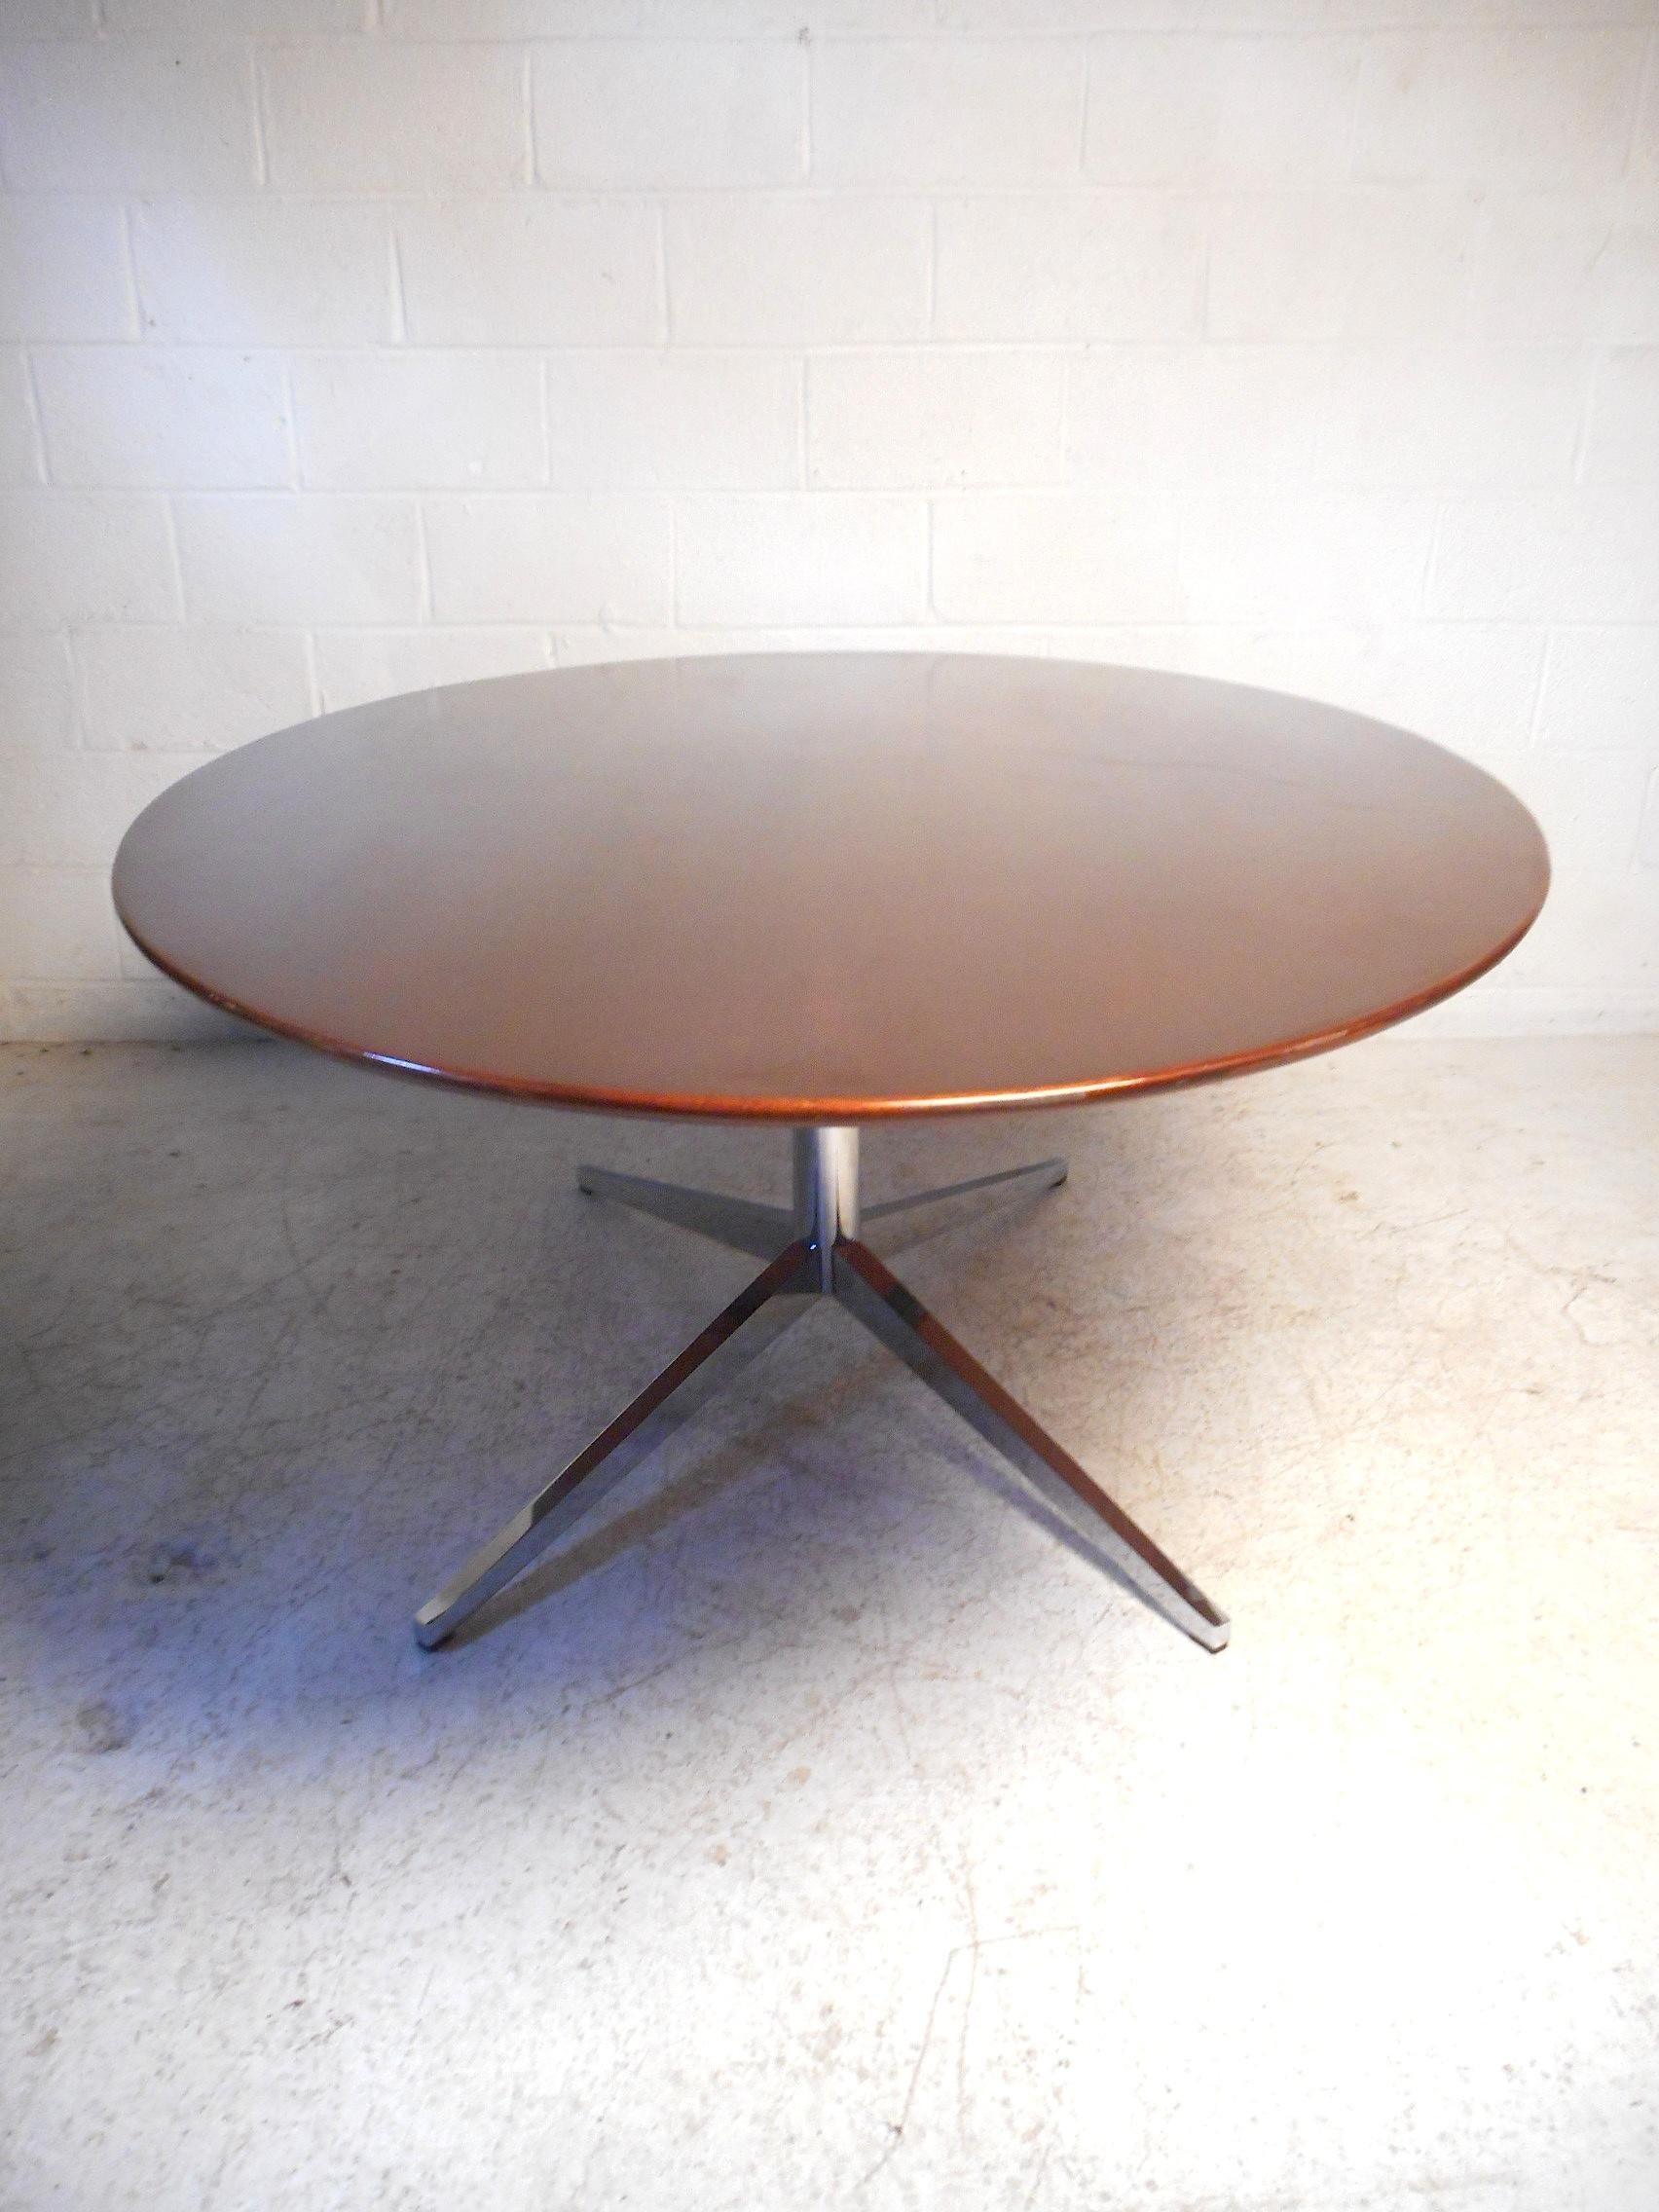 American Midcentury Dining or Conference Table by Knoll